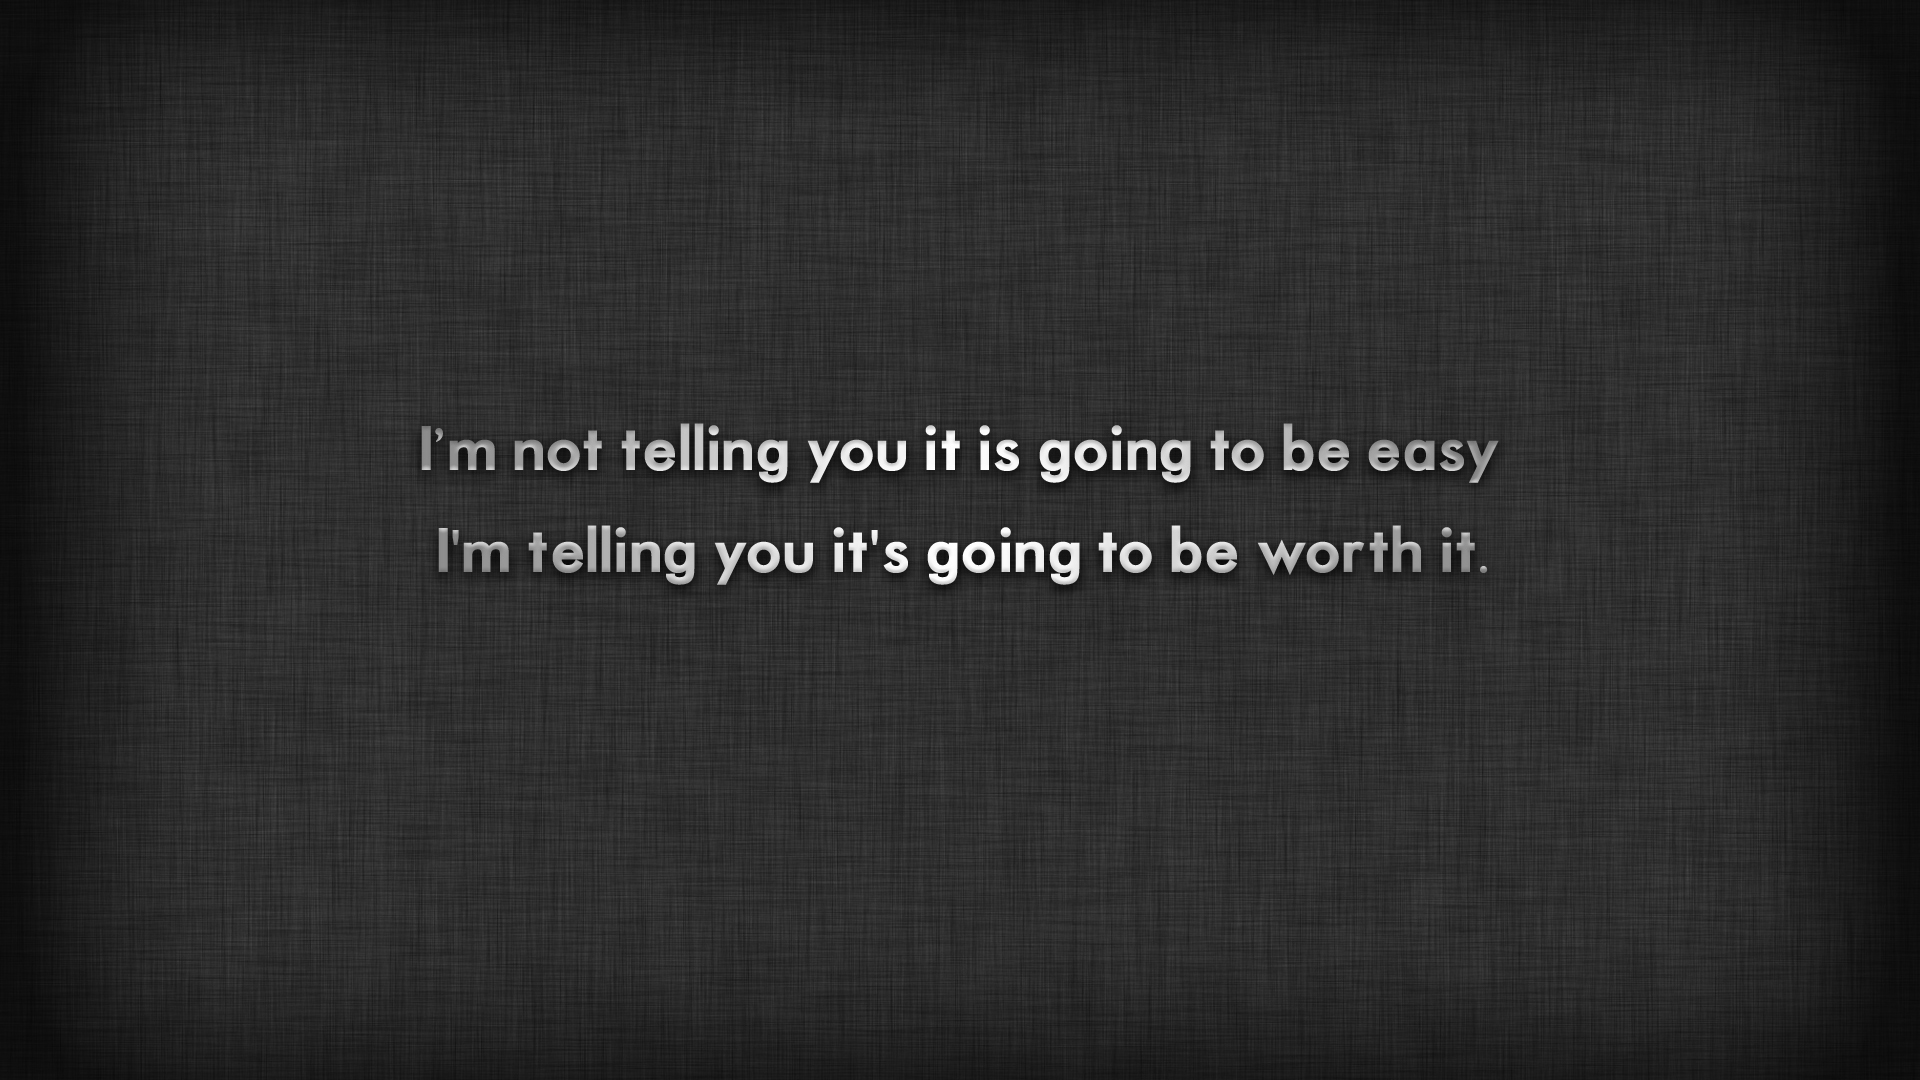 I Am Not Telling You It Is Going To Be Easy I Am Telling You It Is Going To Be Worth It HD